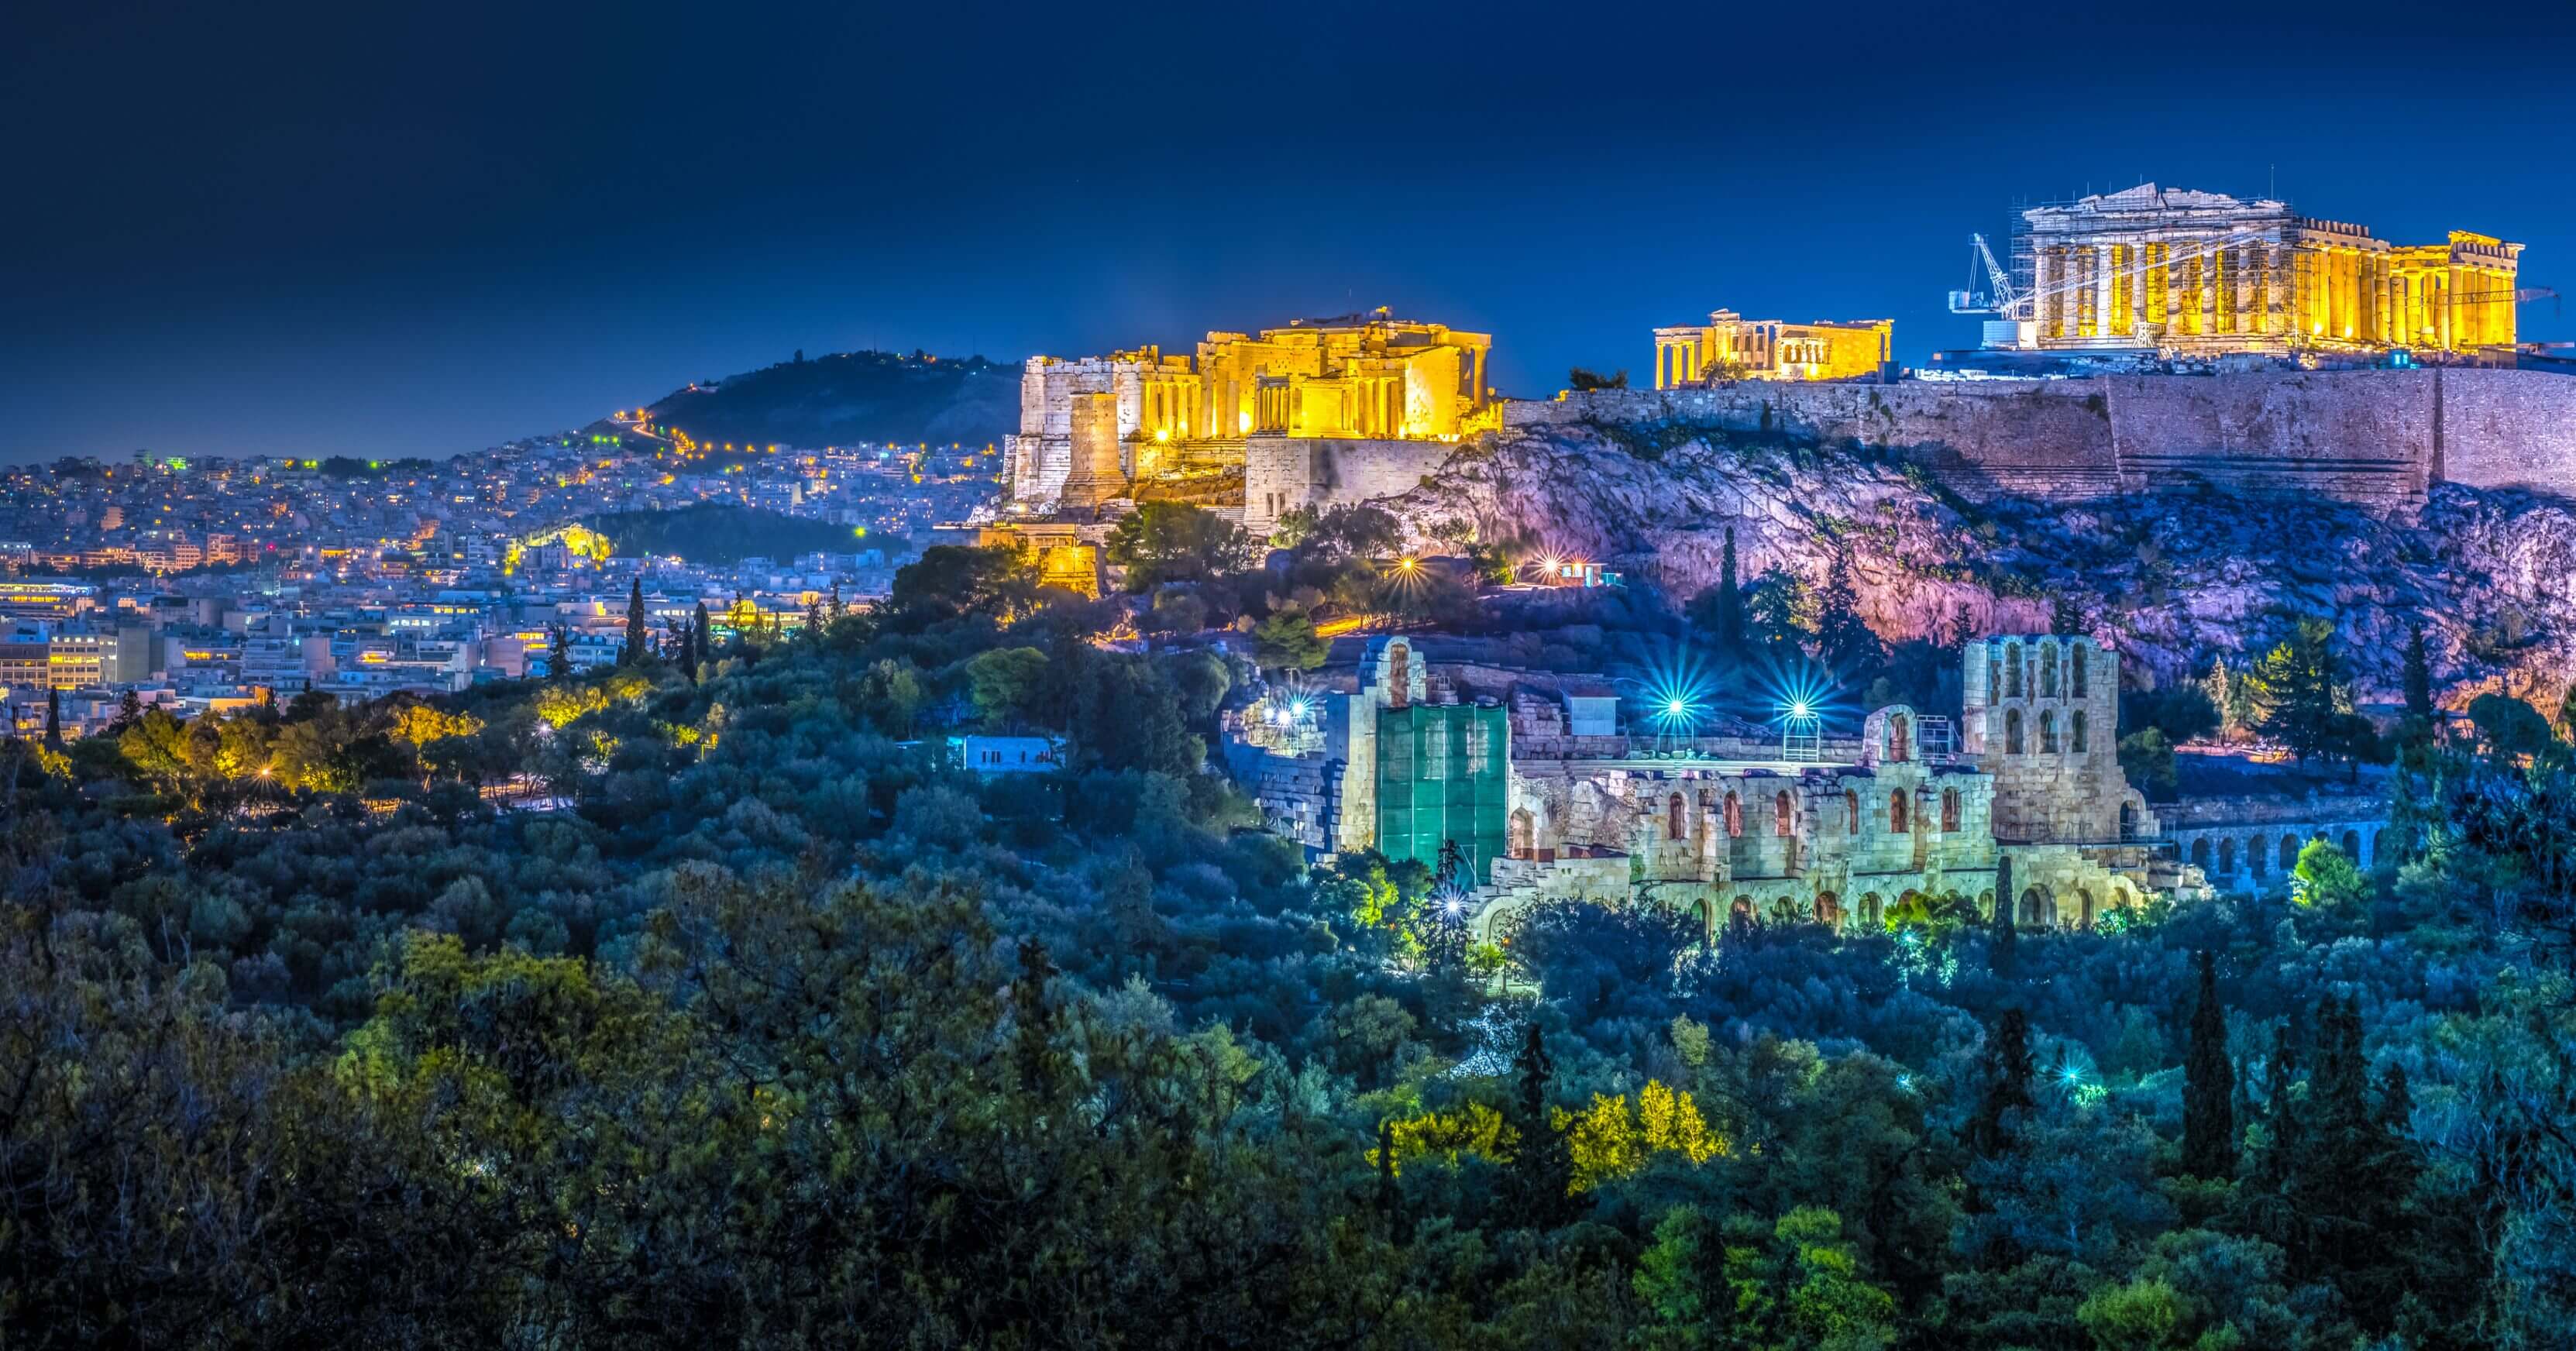 Parthenon and Herodium construction in Acropolis Hill in Athens, Greece shot in blue hou